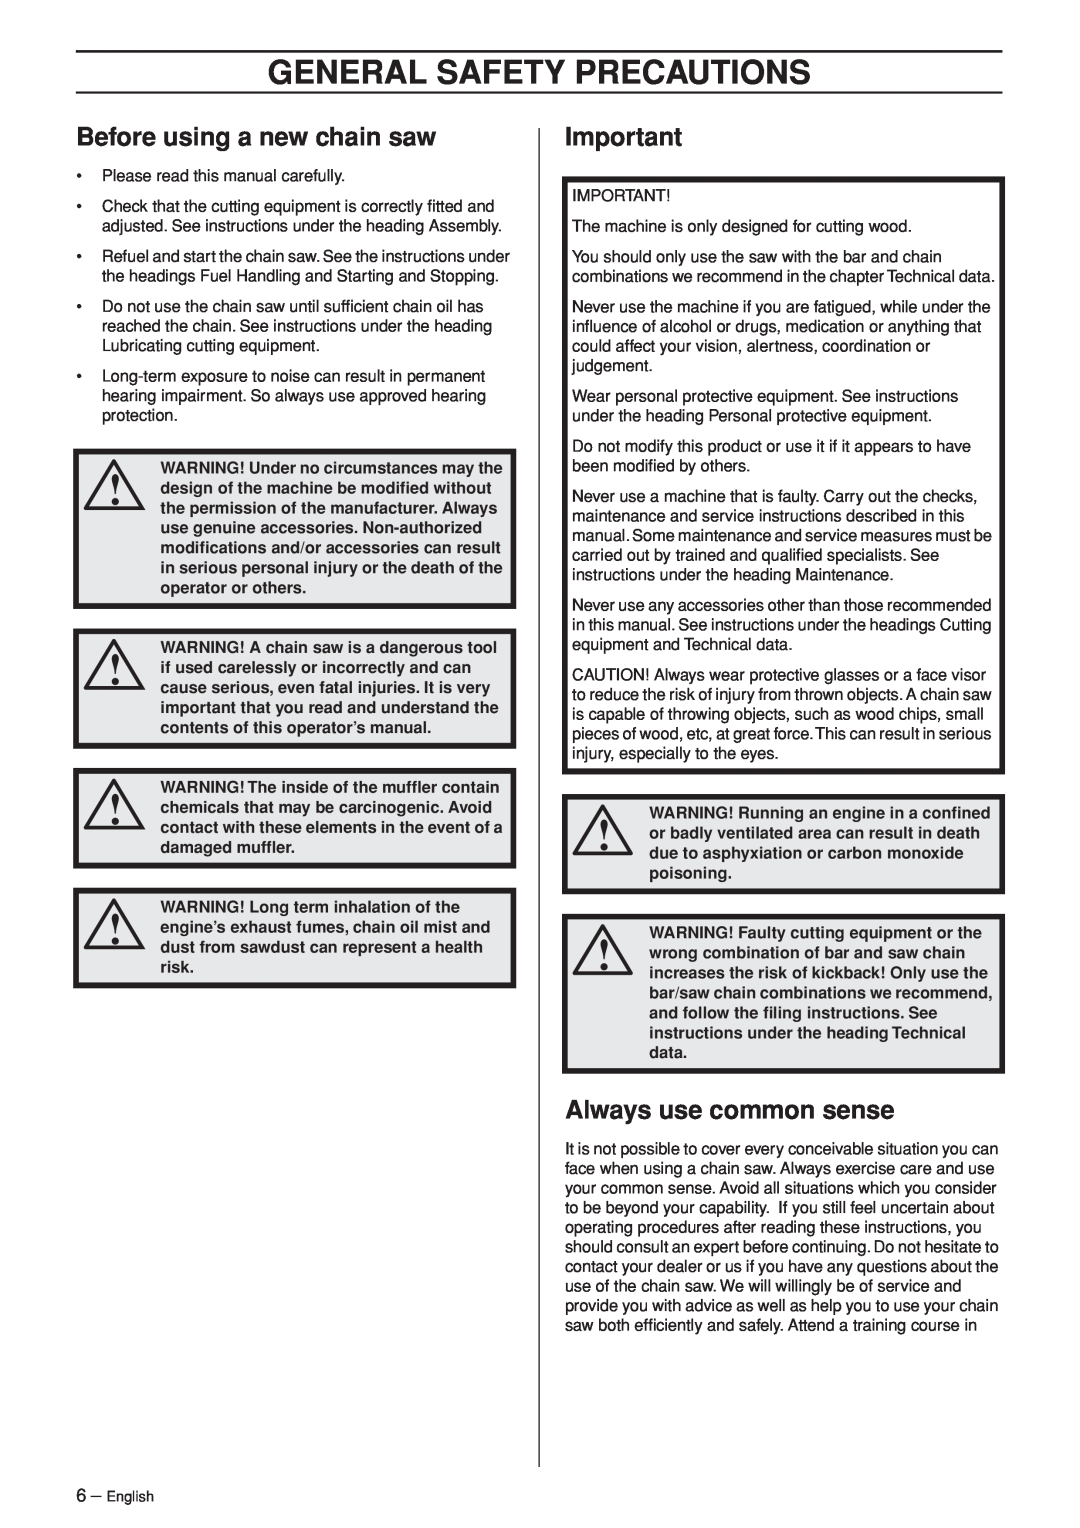 Husqvarna 455 RANCHER manual General Safety Precautions, Before using a new chain saw, Always use common sense 